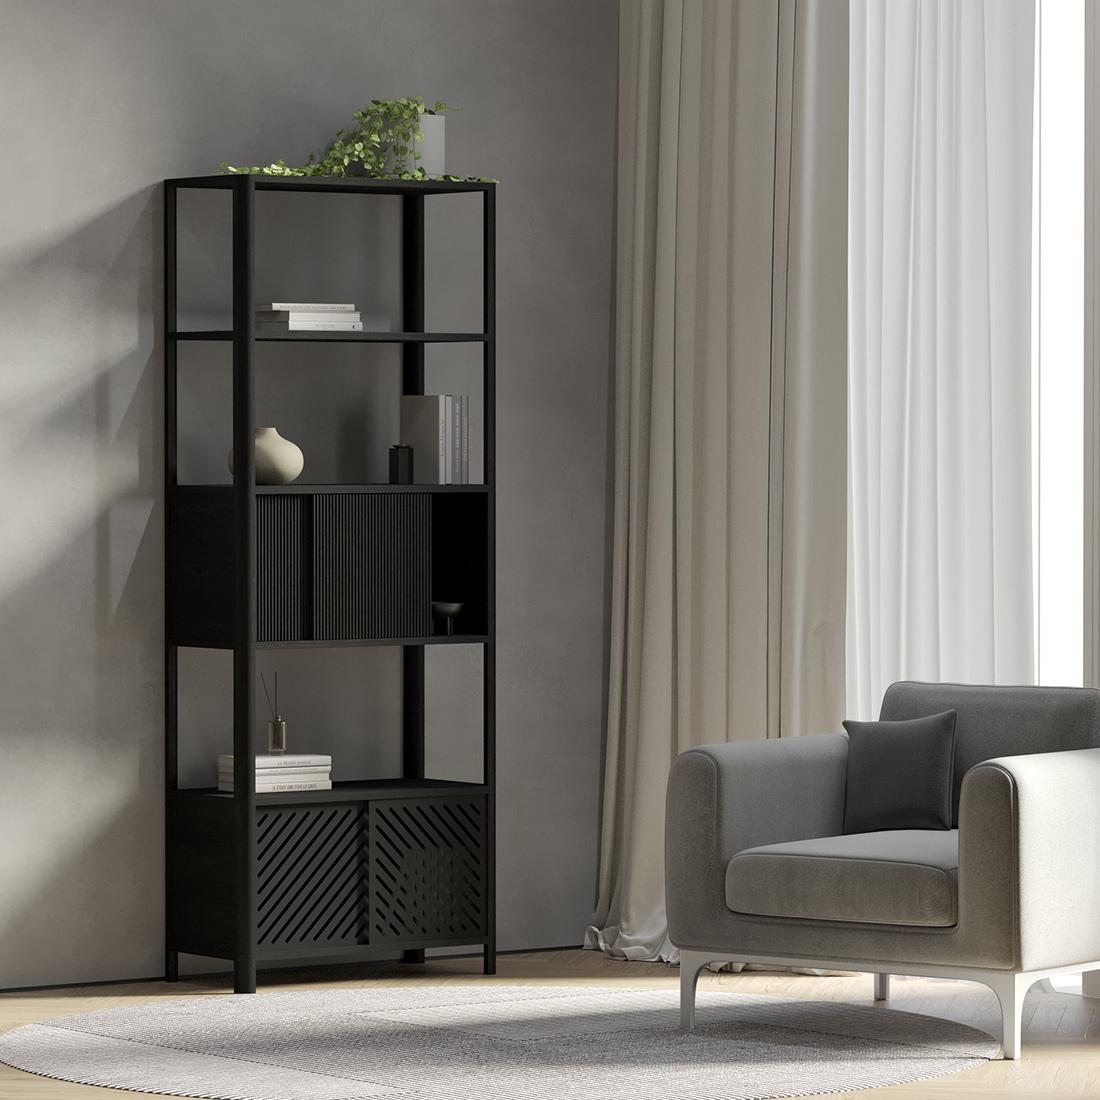 Cloe, Black Side Table with Black Wood Doors In New Condition For Sale In Madrid, Madrid